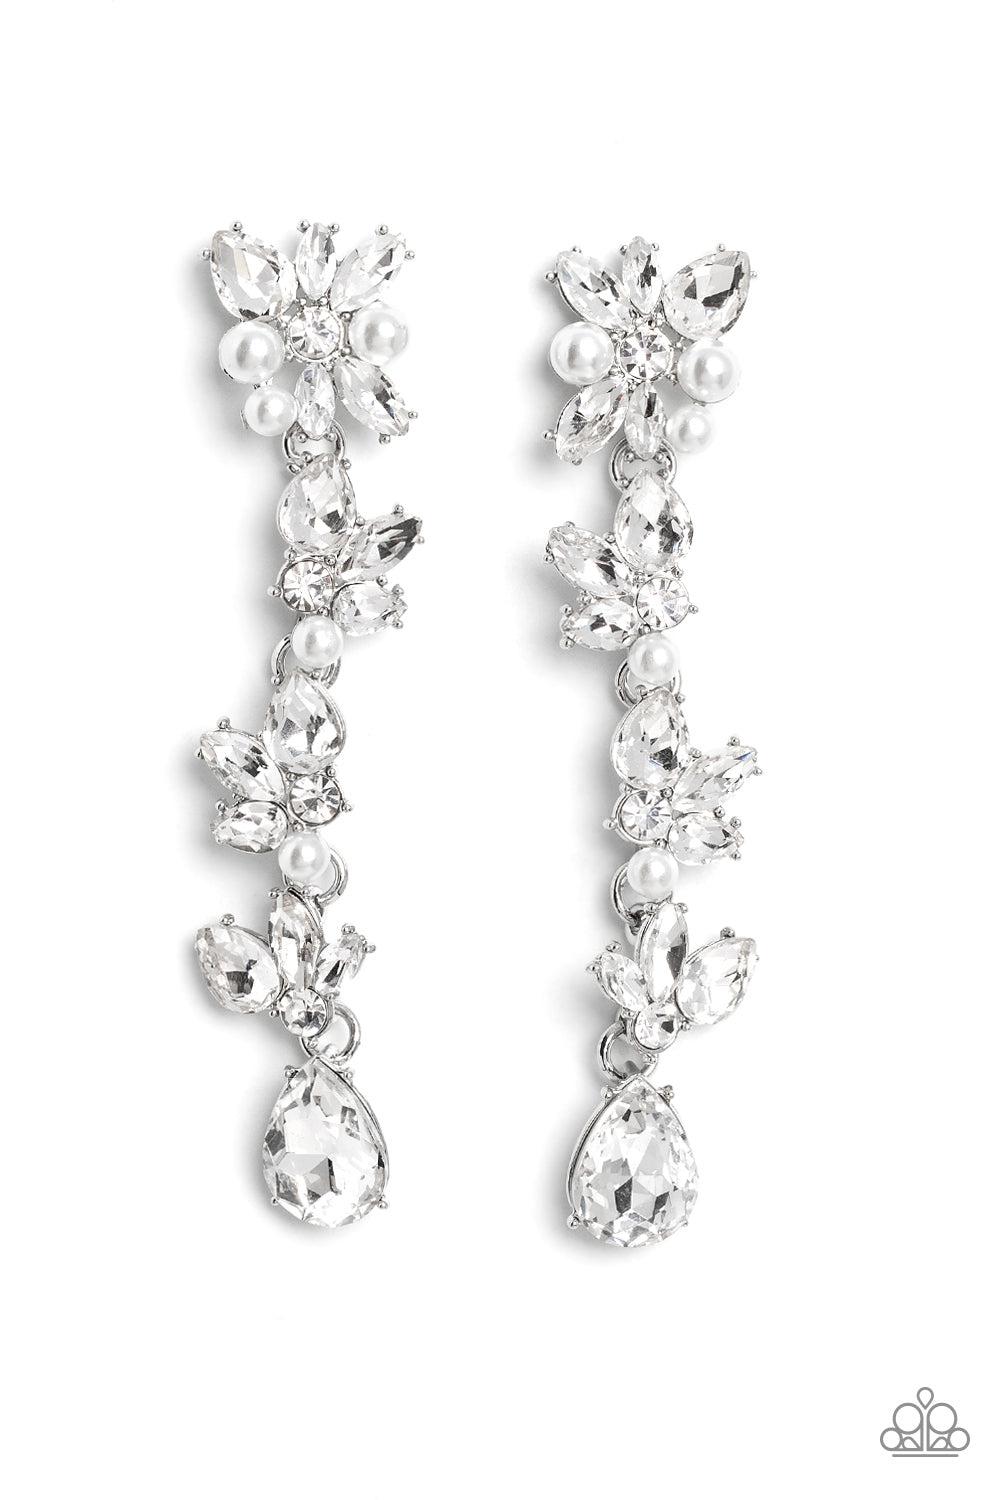 LIGHT at the Opera White Rhinestone & Pearl Earrings - Paparazzi Accessories- lightbox - CarasShop.com - $5 Jewelry by Cara Jewels